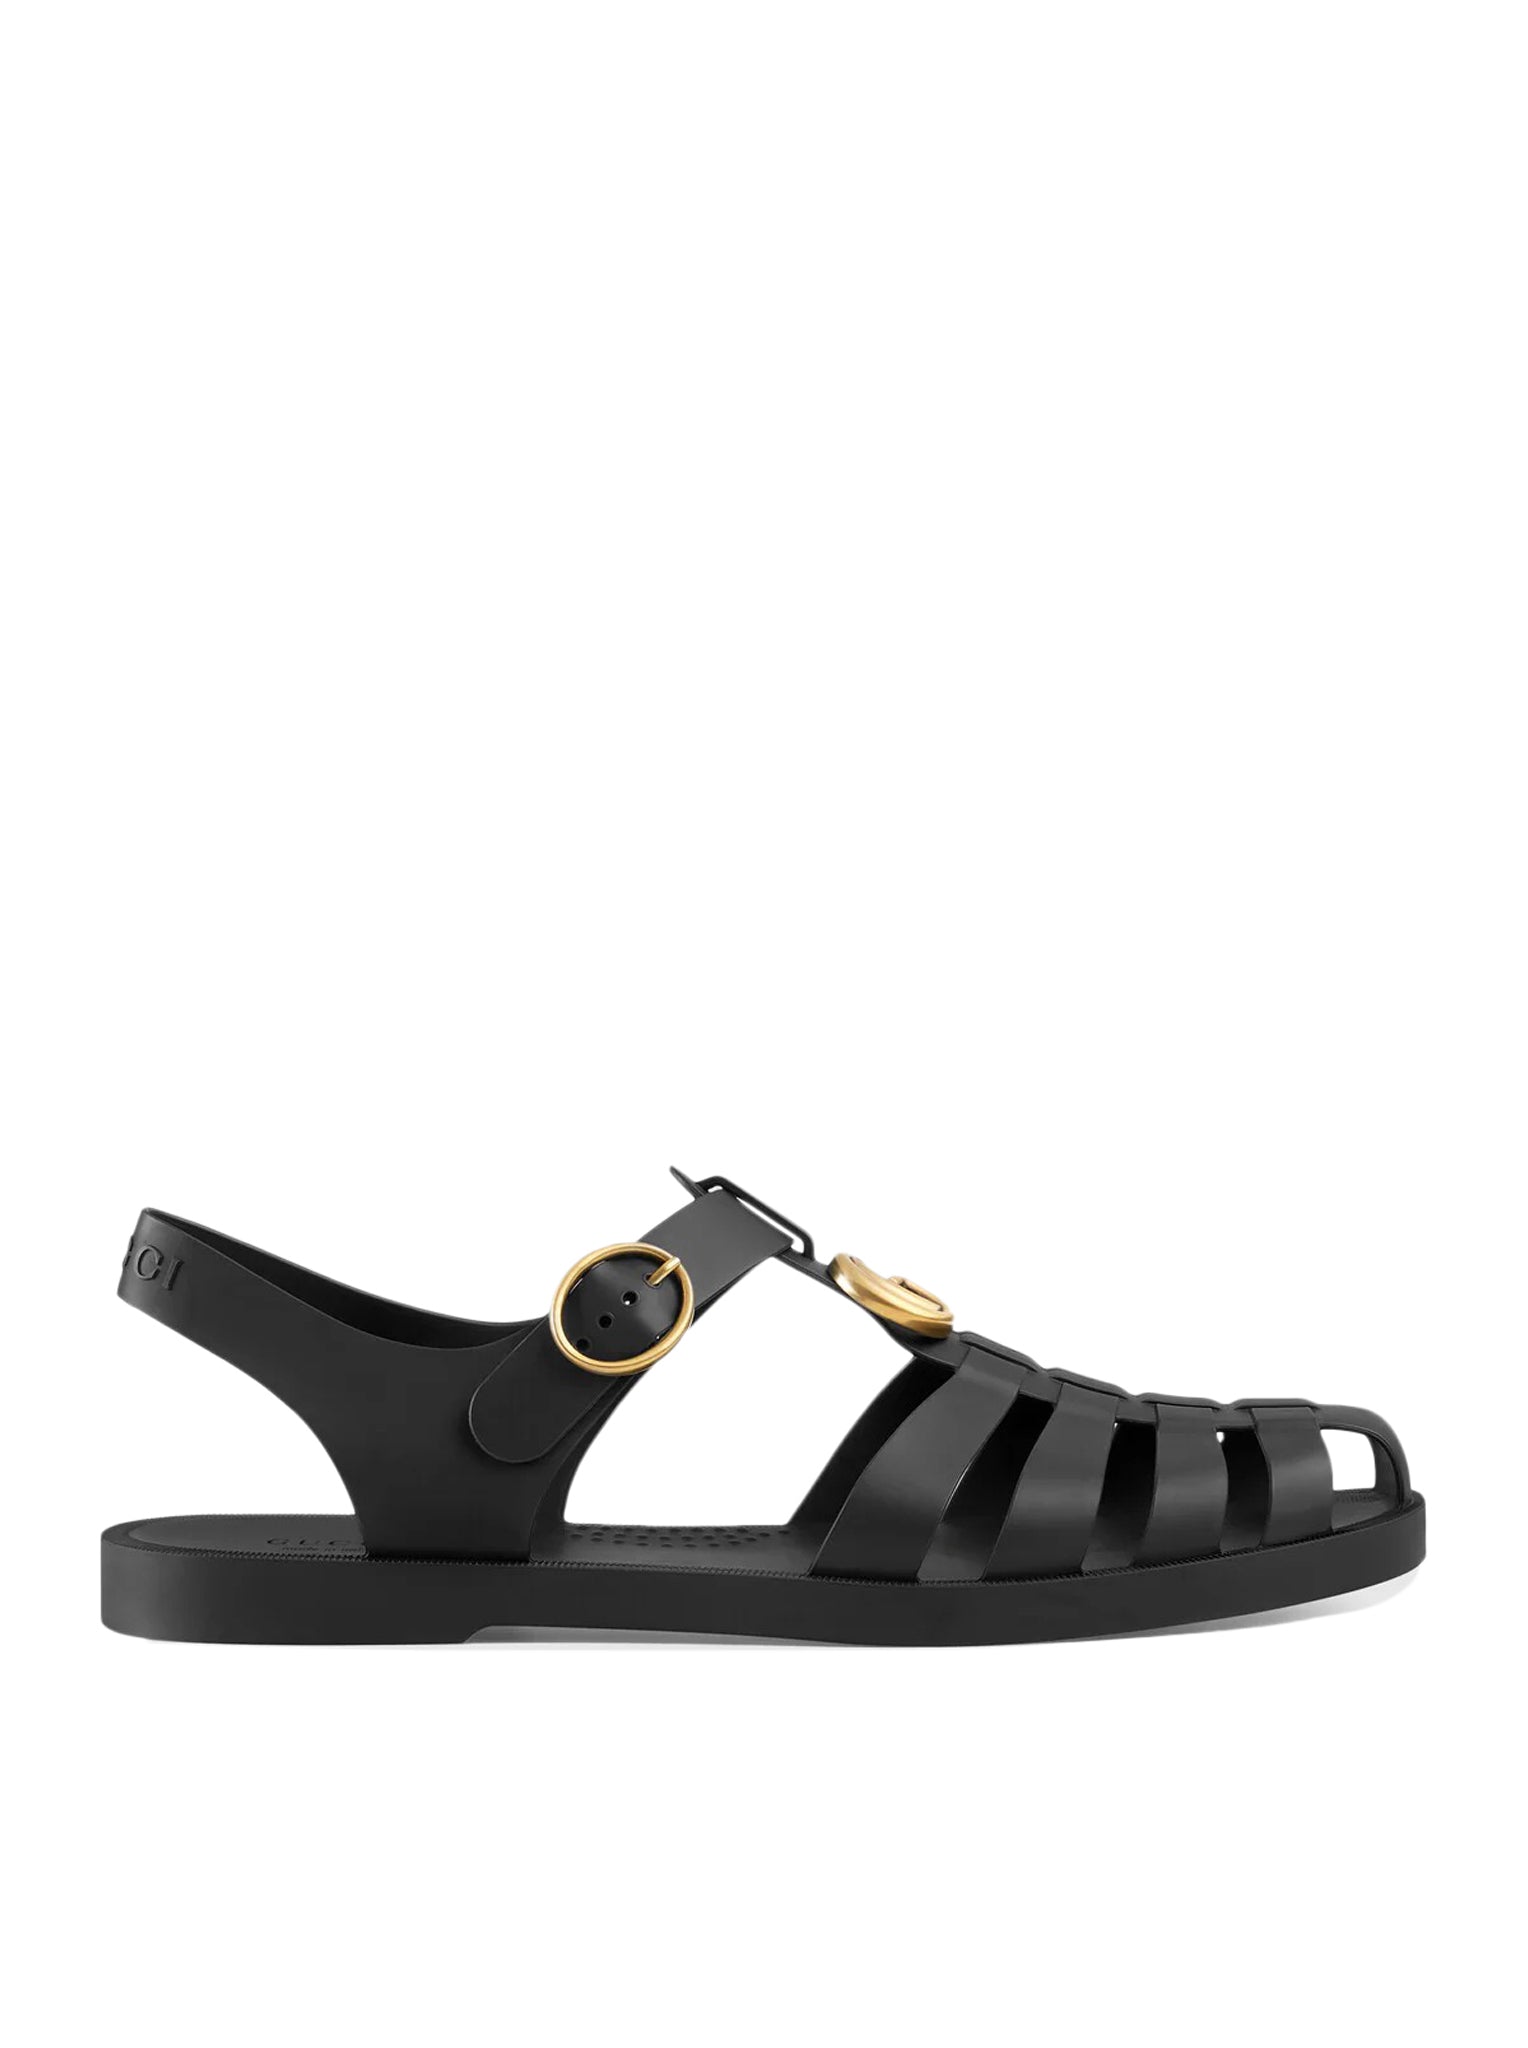 GUCCI SANDAL WITH RUBBER BUCKLE STRAP